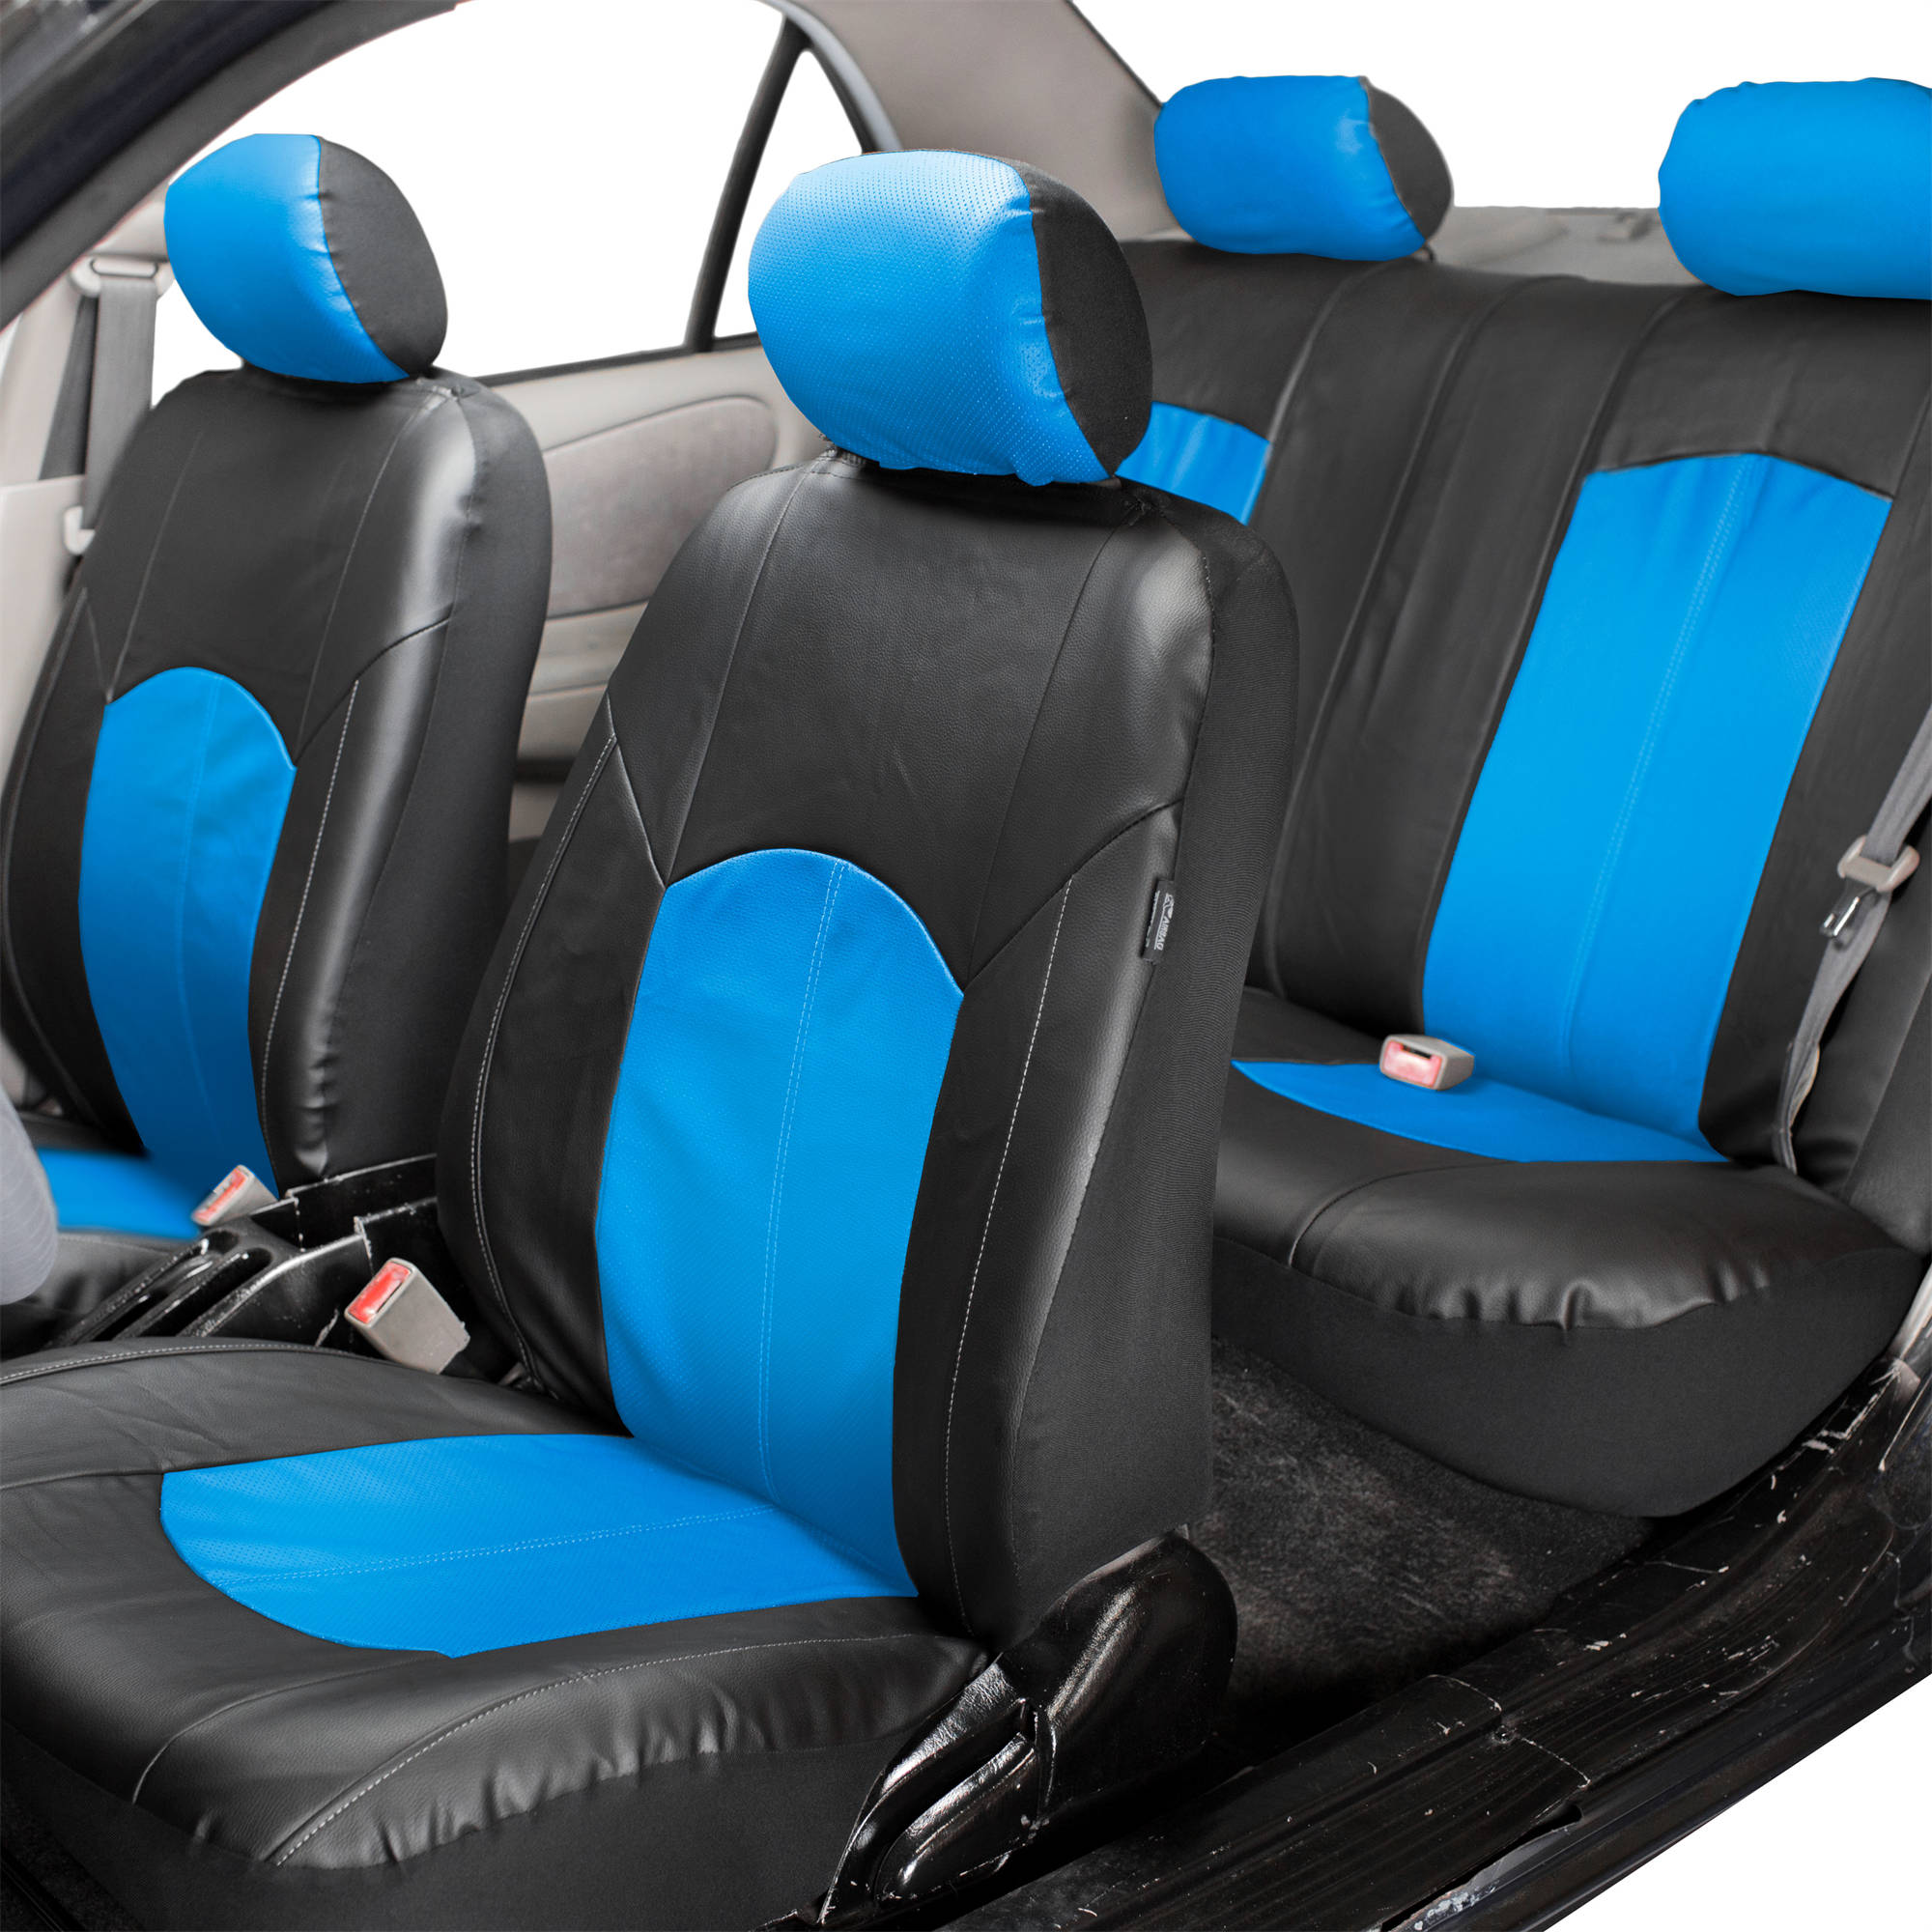 PU Leather Complete Set Front Back Seat Covers Blue For Car | eBay